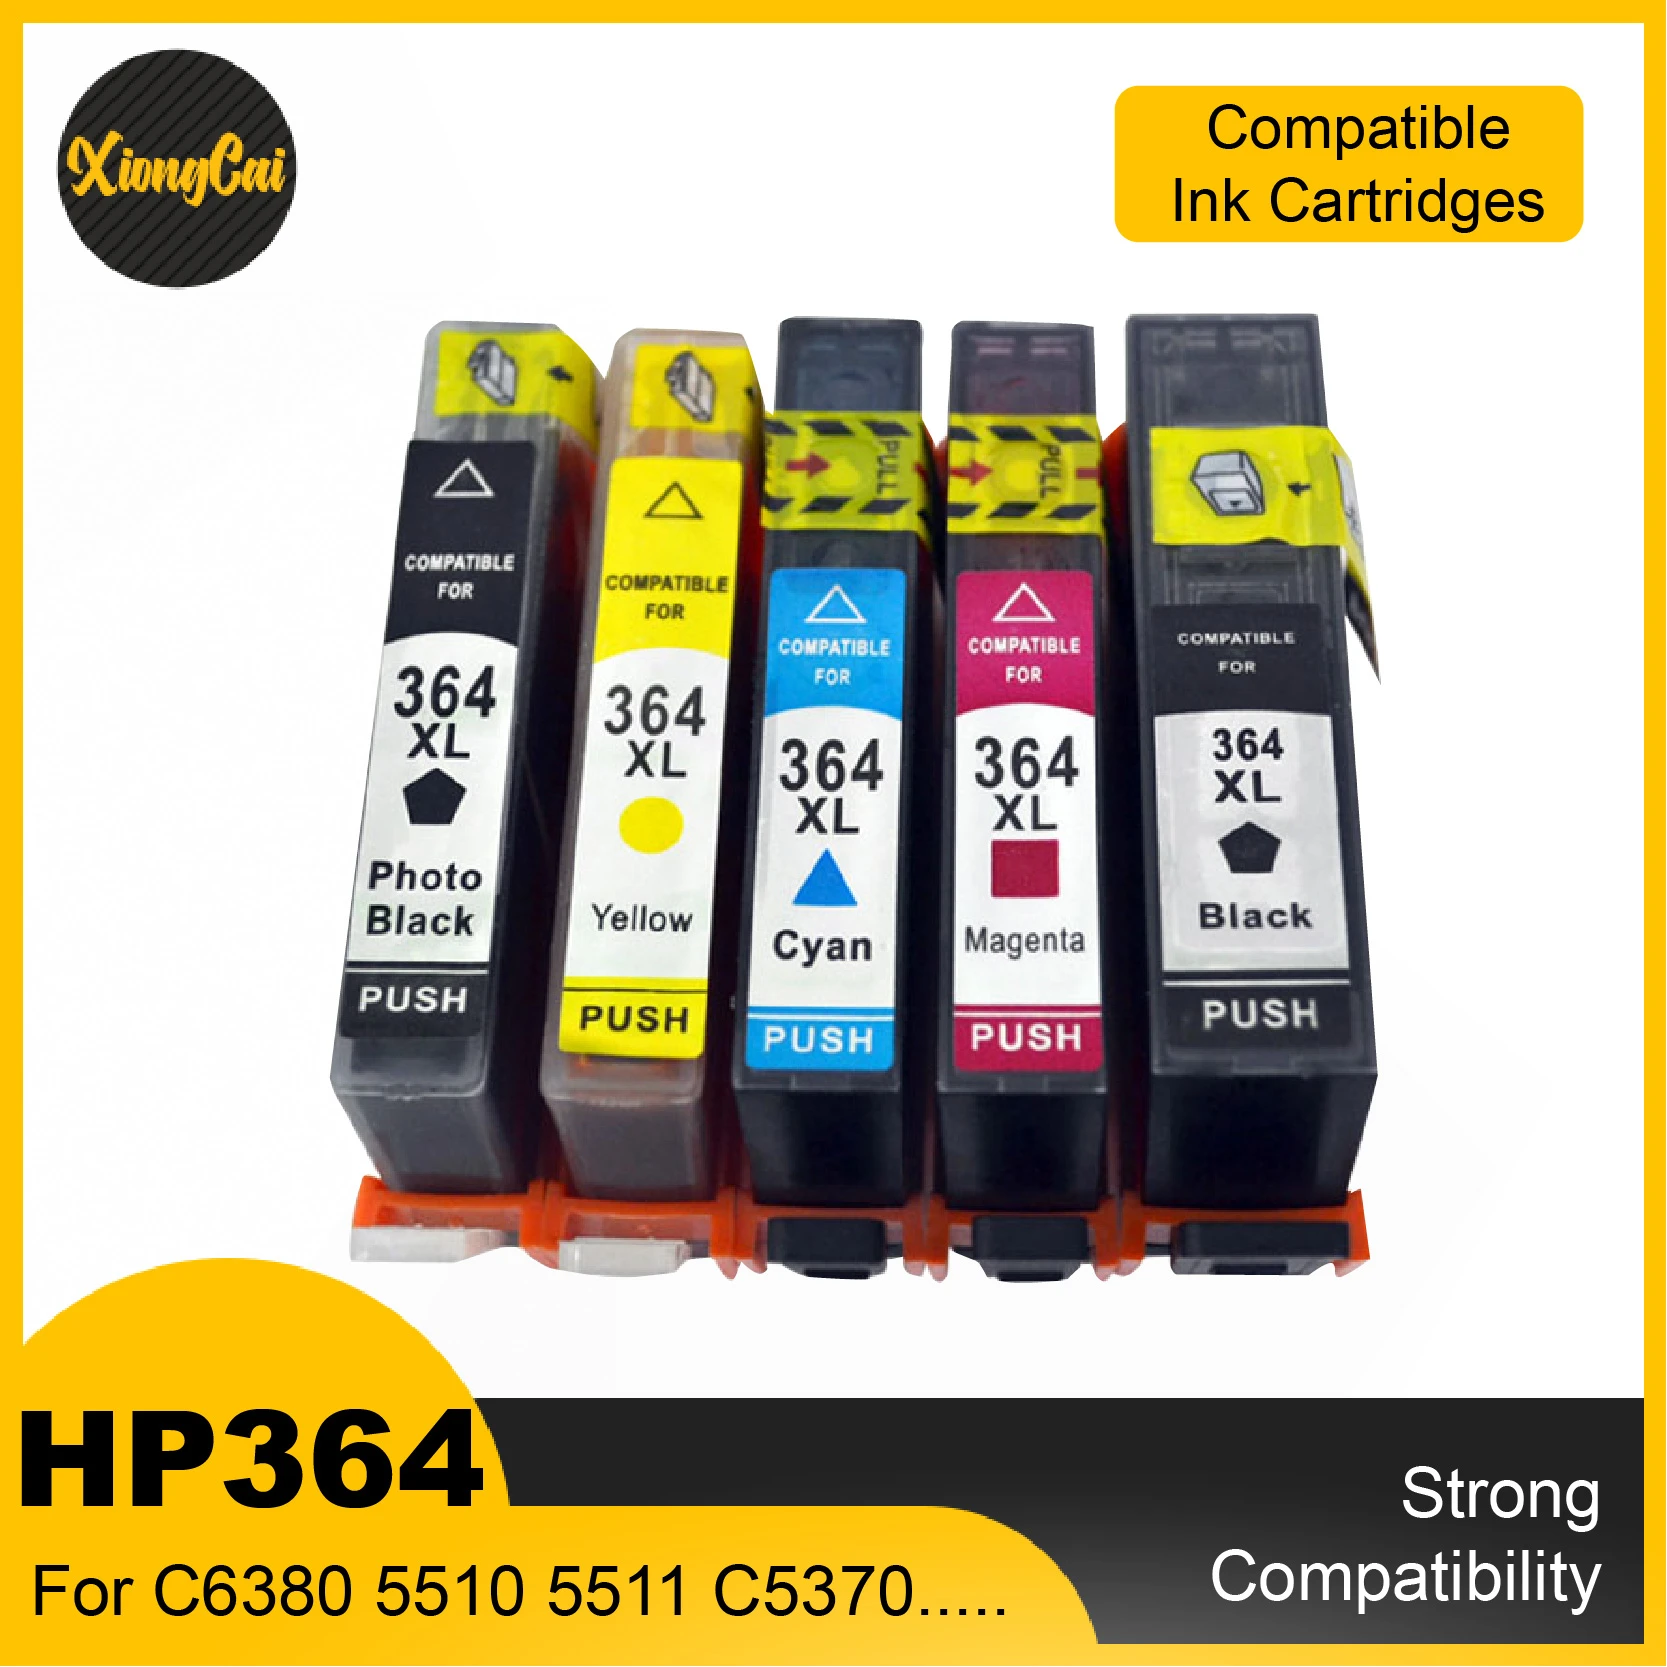 NEW For HP 5Pcs Compatible Ink Cartridges for HP364 364 364XL for HP  Photosmart 5520 6510 6520 7510 B109 B110 B209 C310 C410|ink cartridge|hp 364  ink cartridgehp 5520 printer cartridges - AliExpress